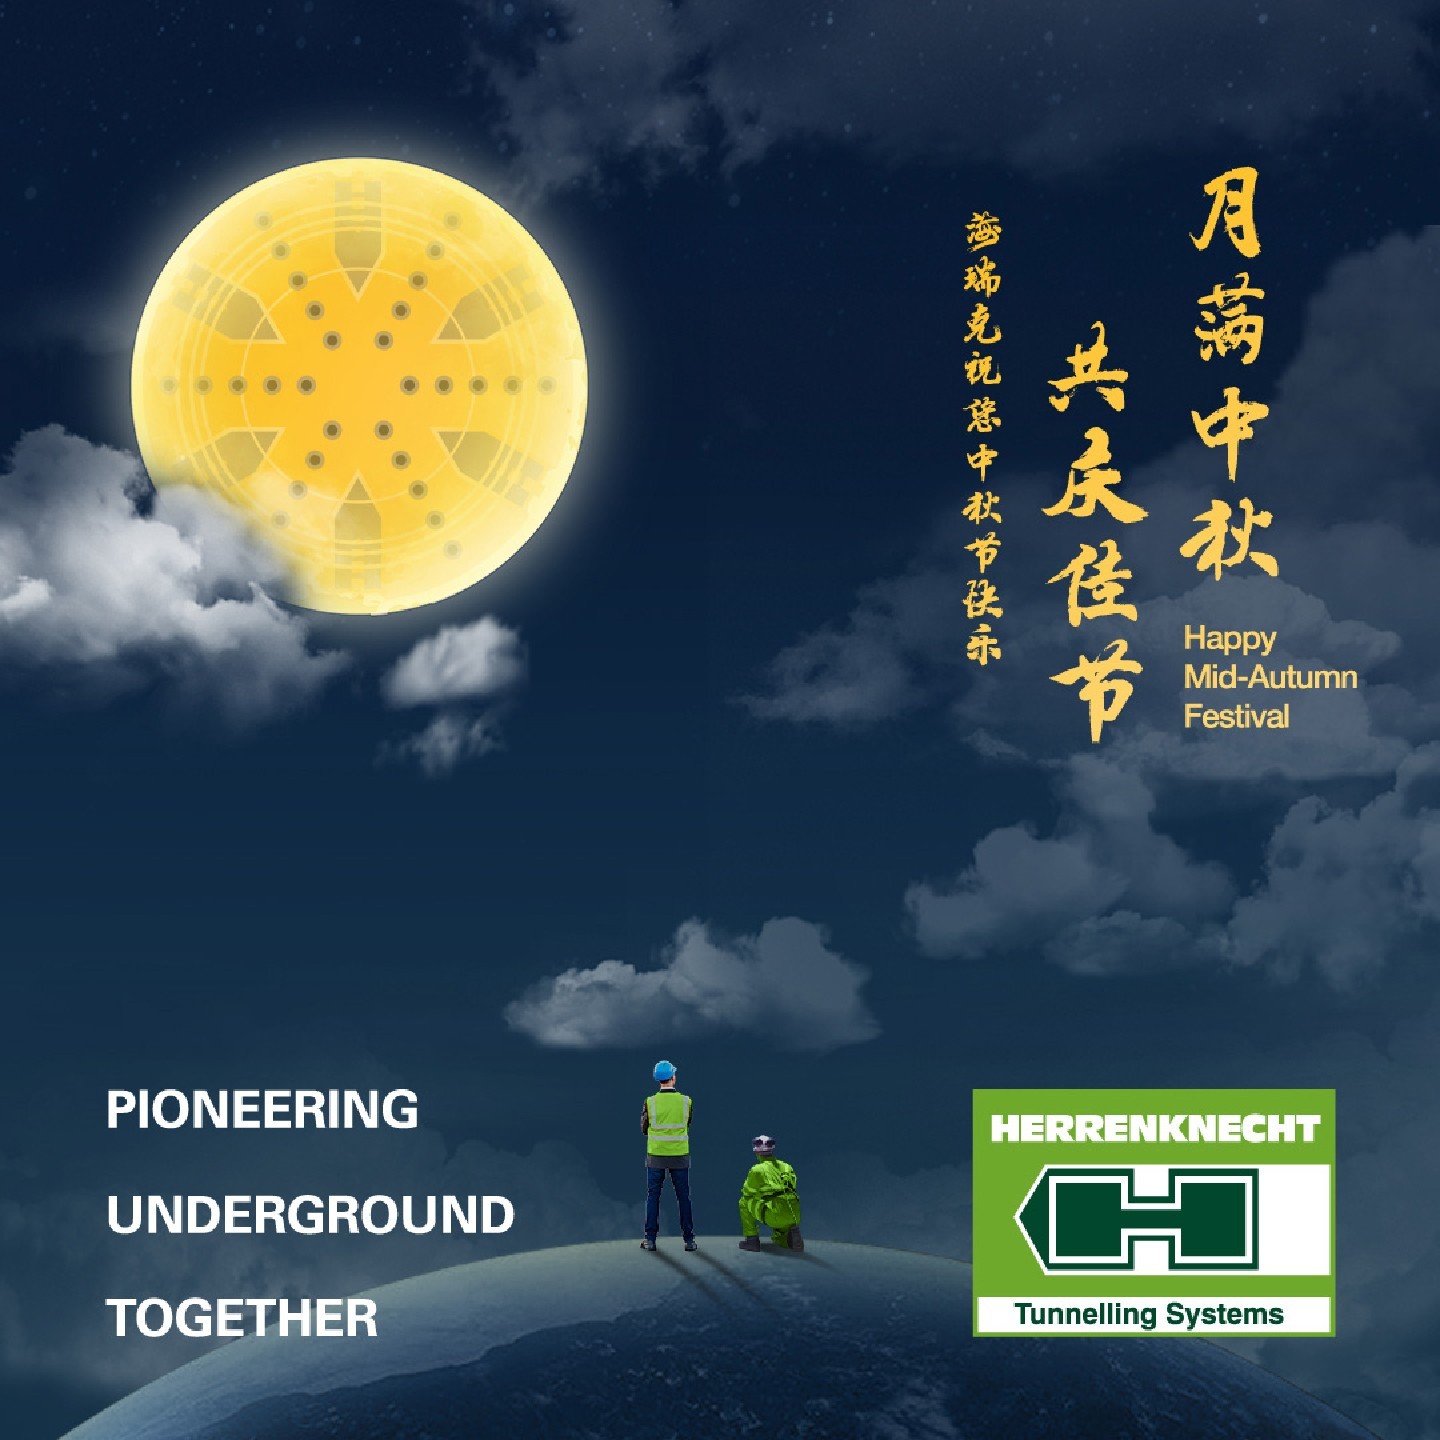 We wish our customers, partners and colleagues a wonderful Chinese Mid-Autumn Festival - next to Chinese New Year, the most important festival in China. Enjoy the sight of the full moon together with your family and friends. 

#pioneeringundergroundtogeth